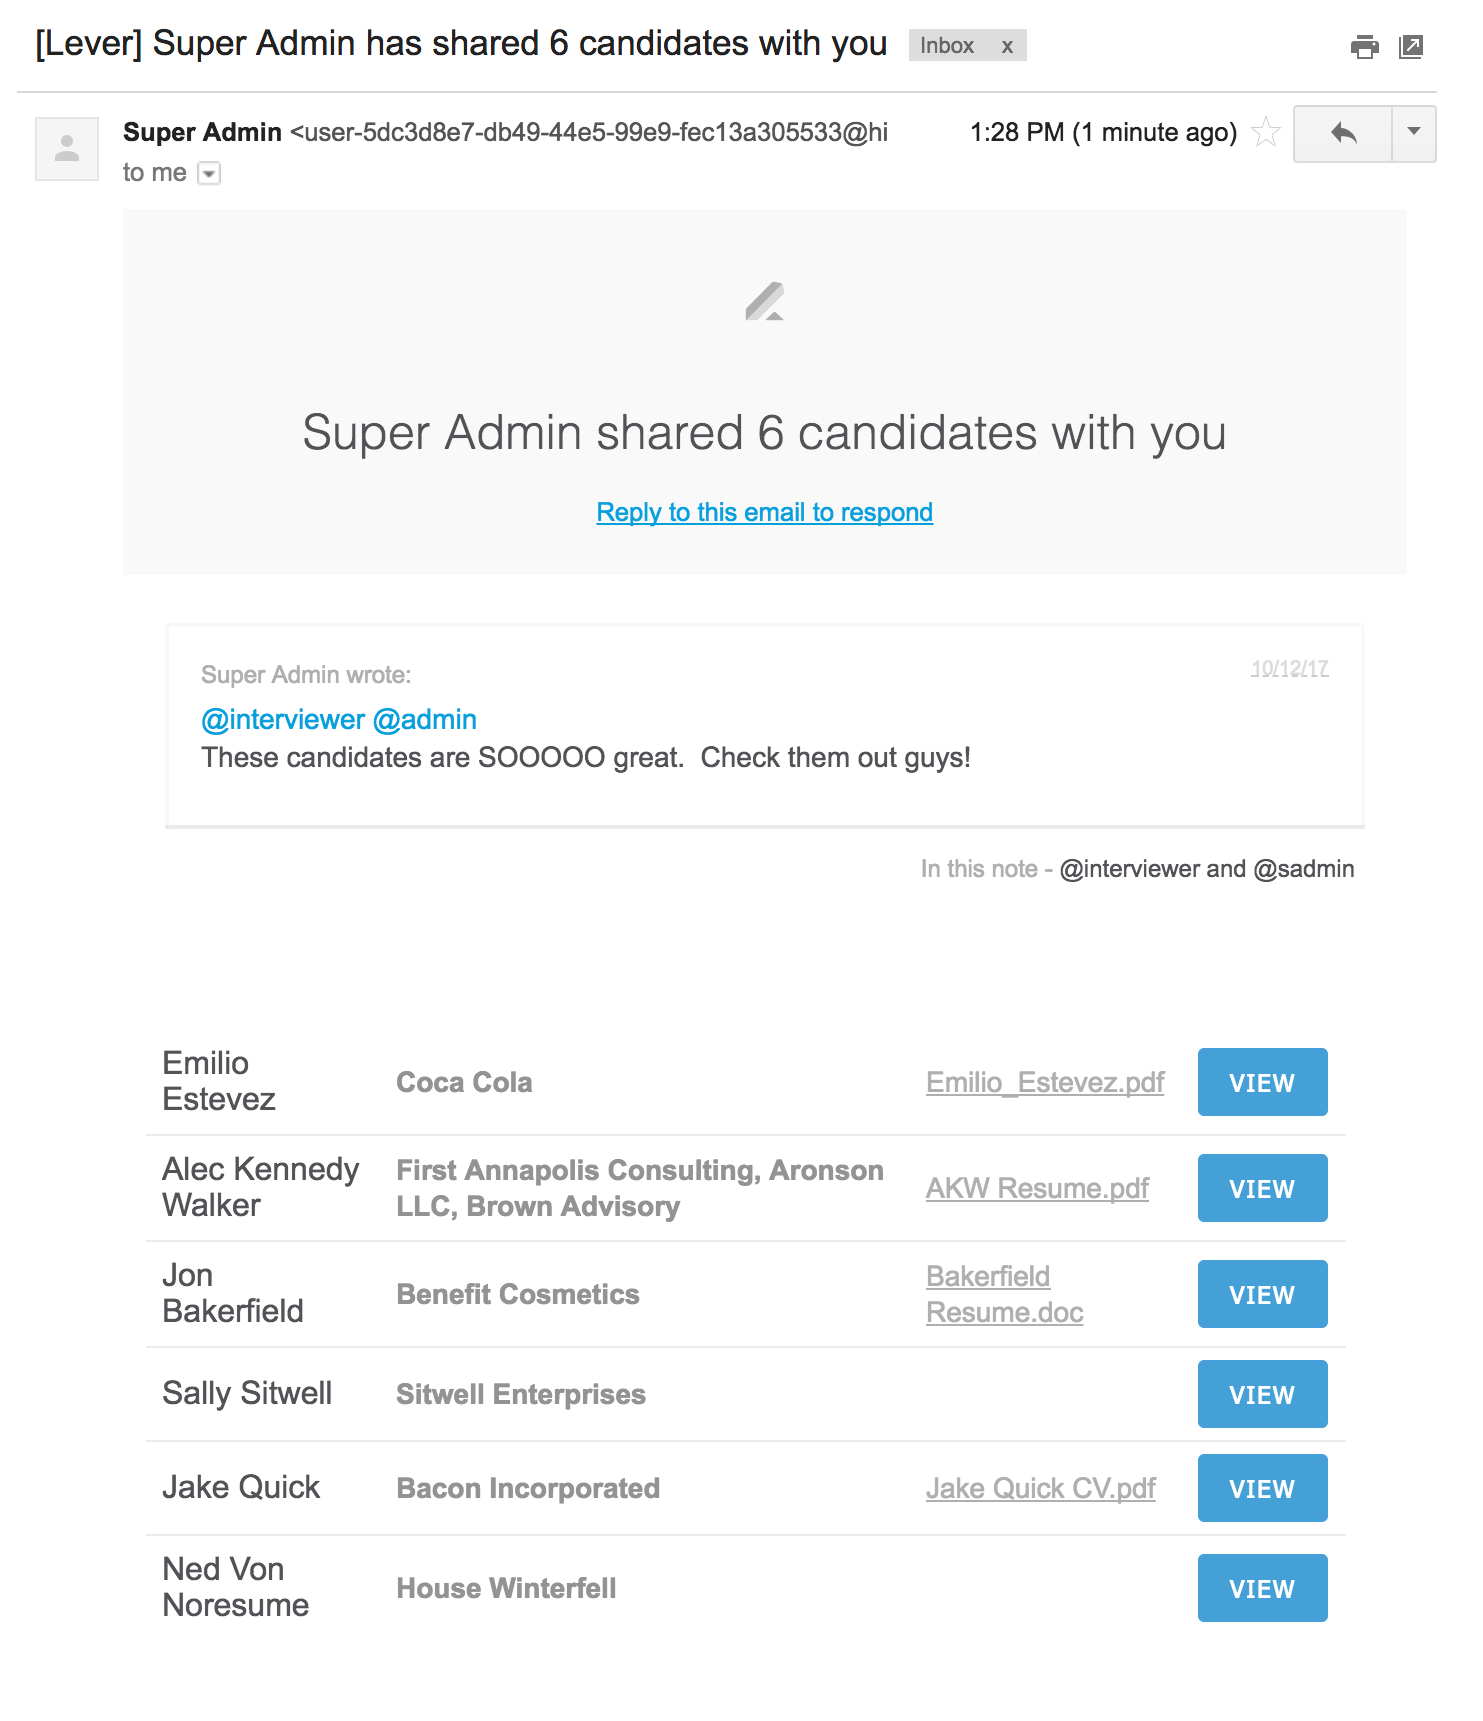 Email with shared candidates as it appears to an internal user.